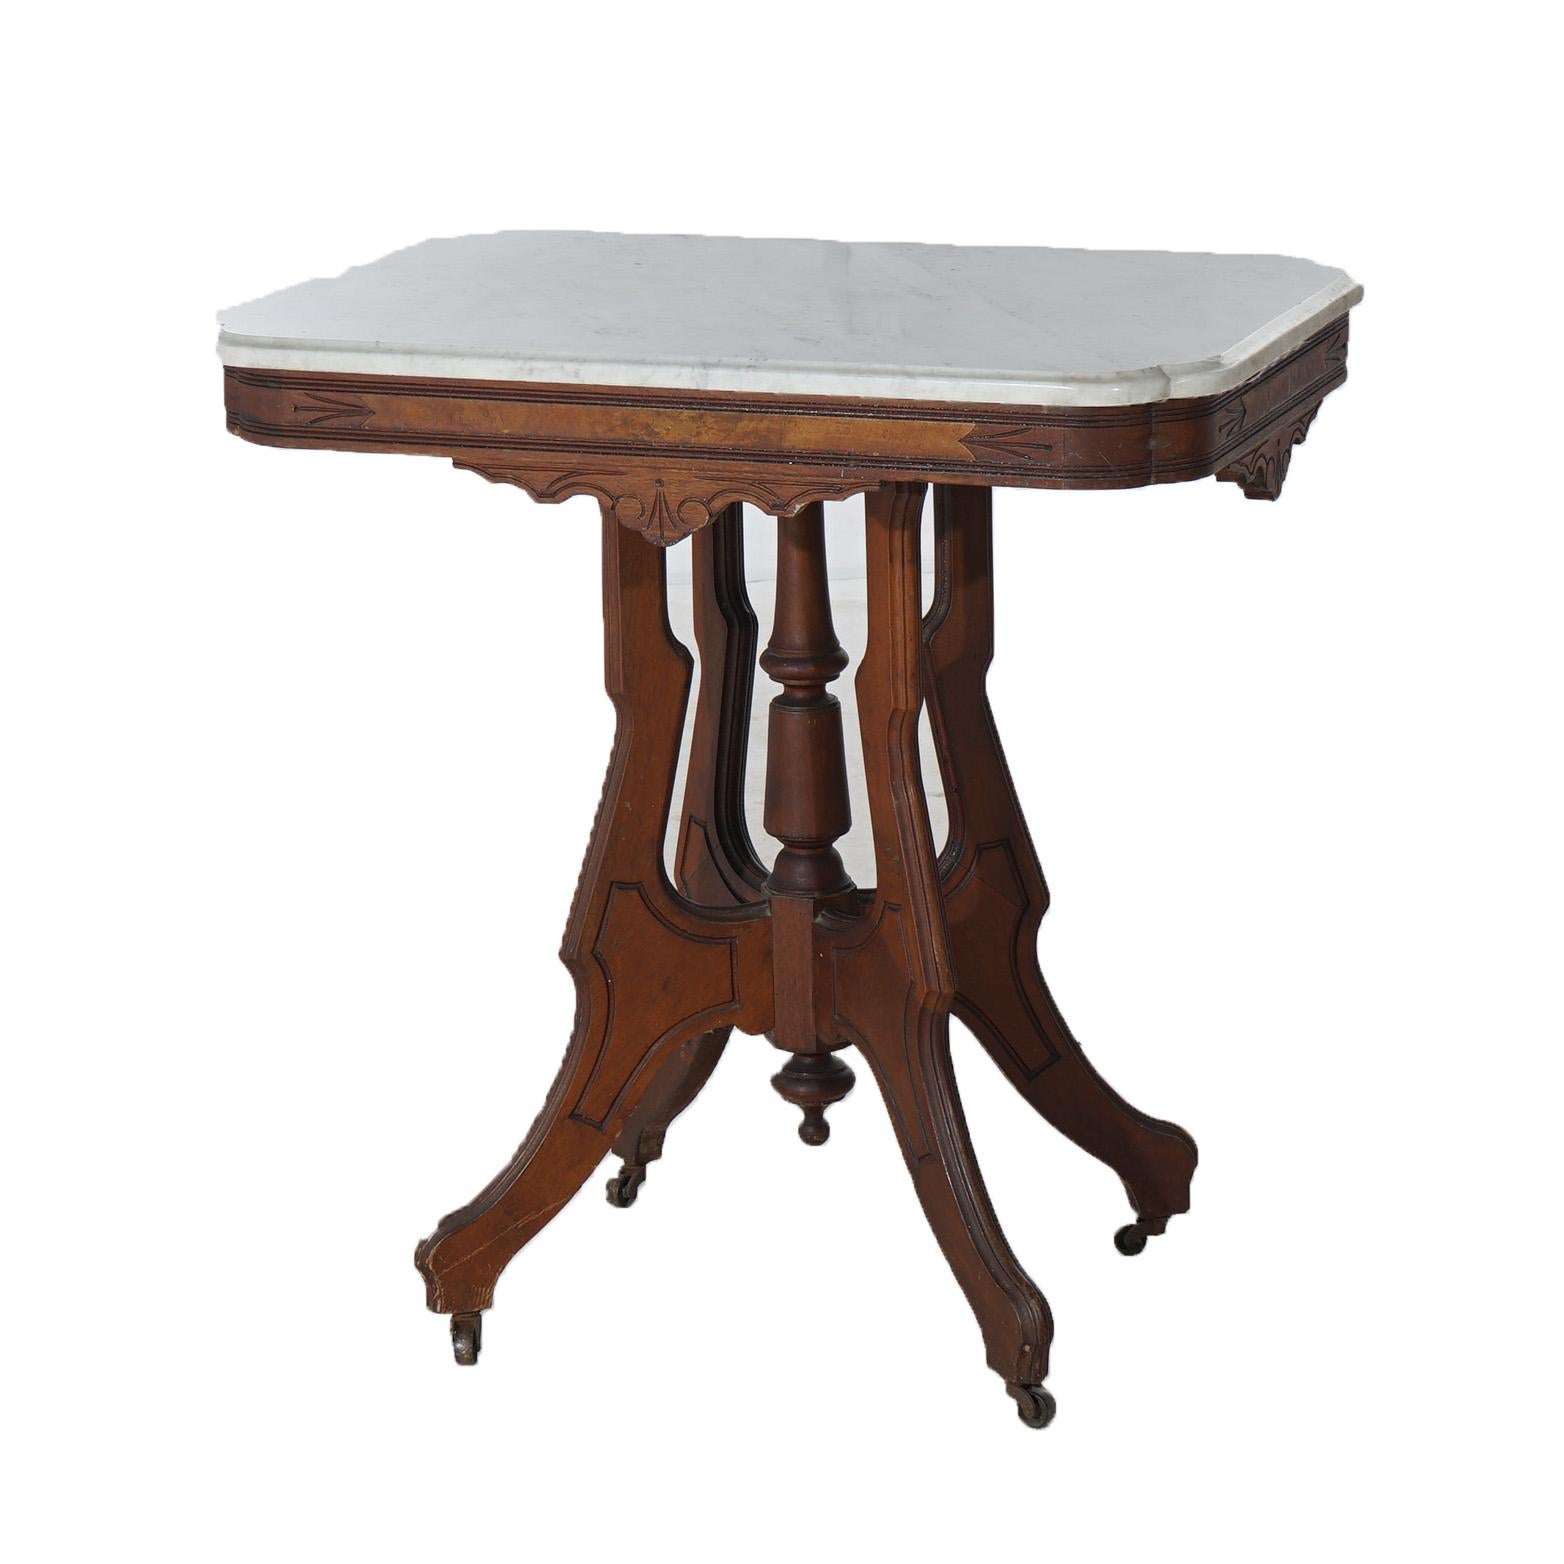 Antique Eastlake Victorian Carved Walnut and Burl Table with Beveled Marble Top over Stylized Scroll Form Legs having Central Finial, c1890’s

Measures - 29 3/4